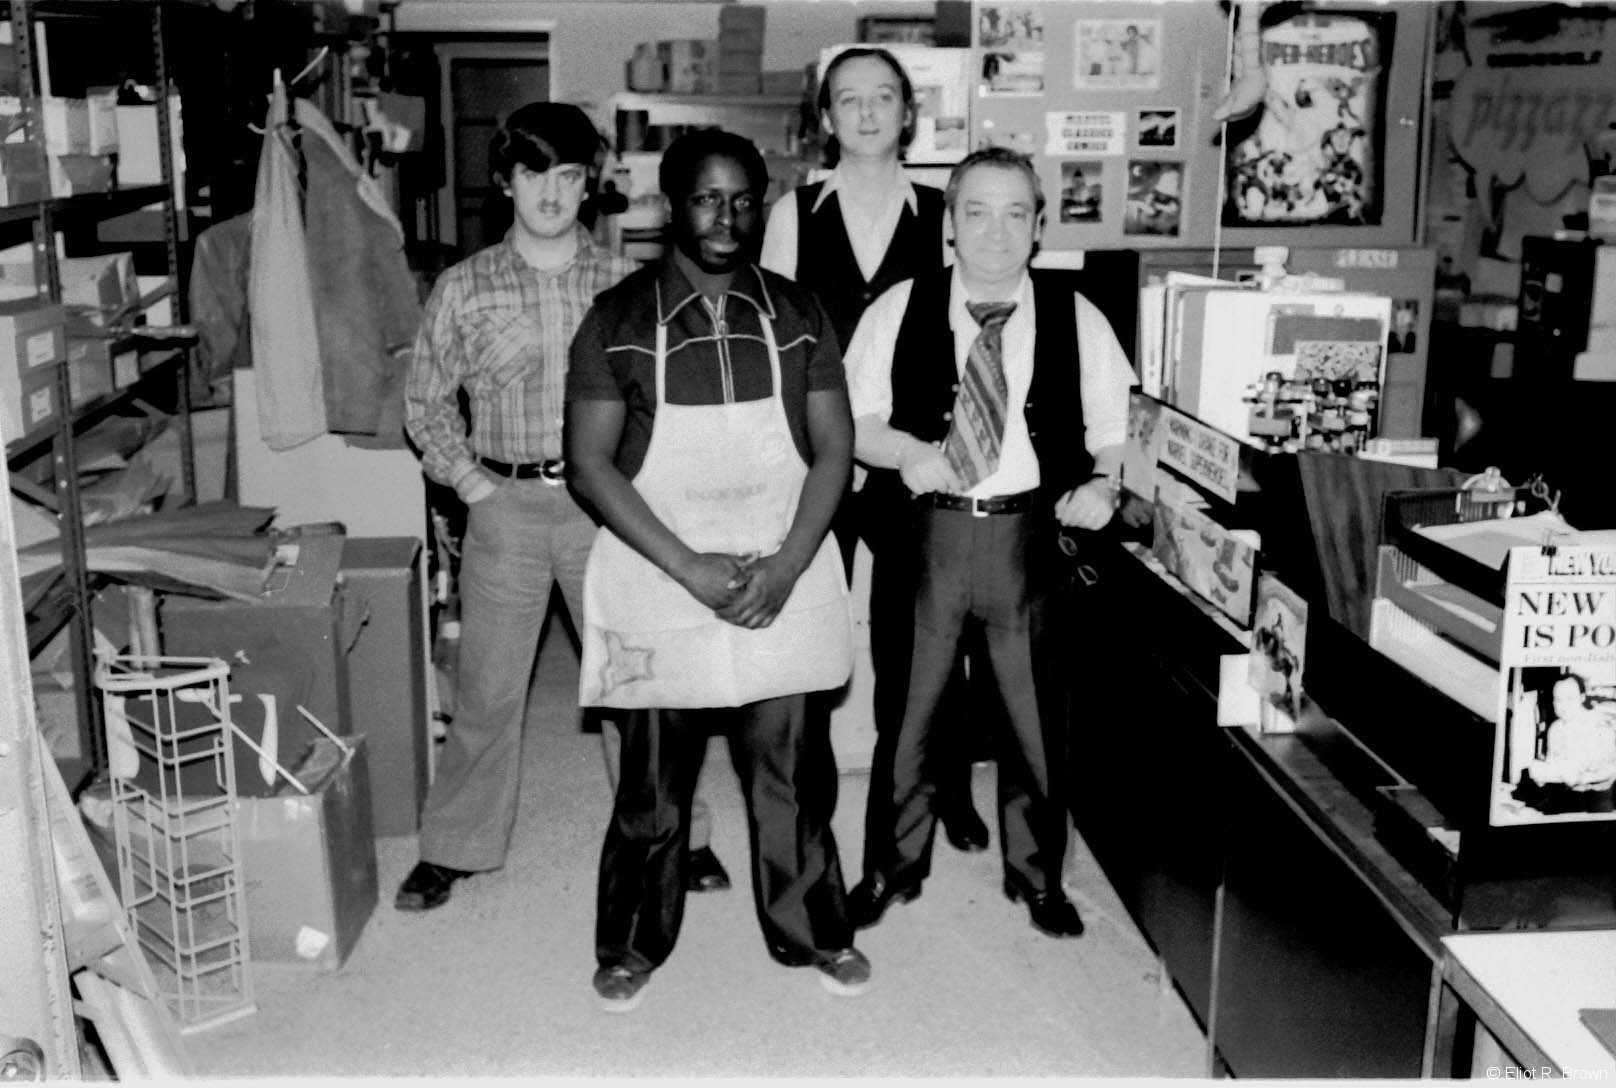 Marvel generated a LOT of mail. These guys made it all move. L-R: John Galvin, Poppy Lopez, Mike Kudzinowski and Tony Cerniglia.